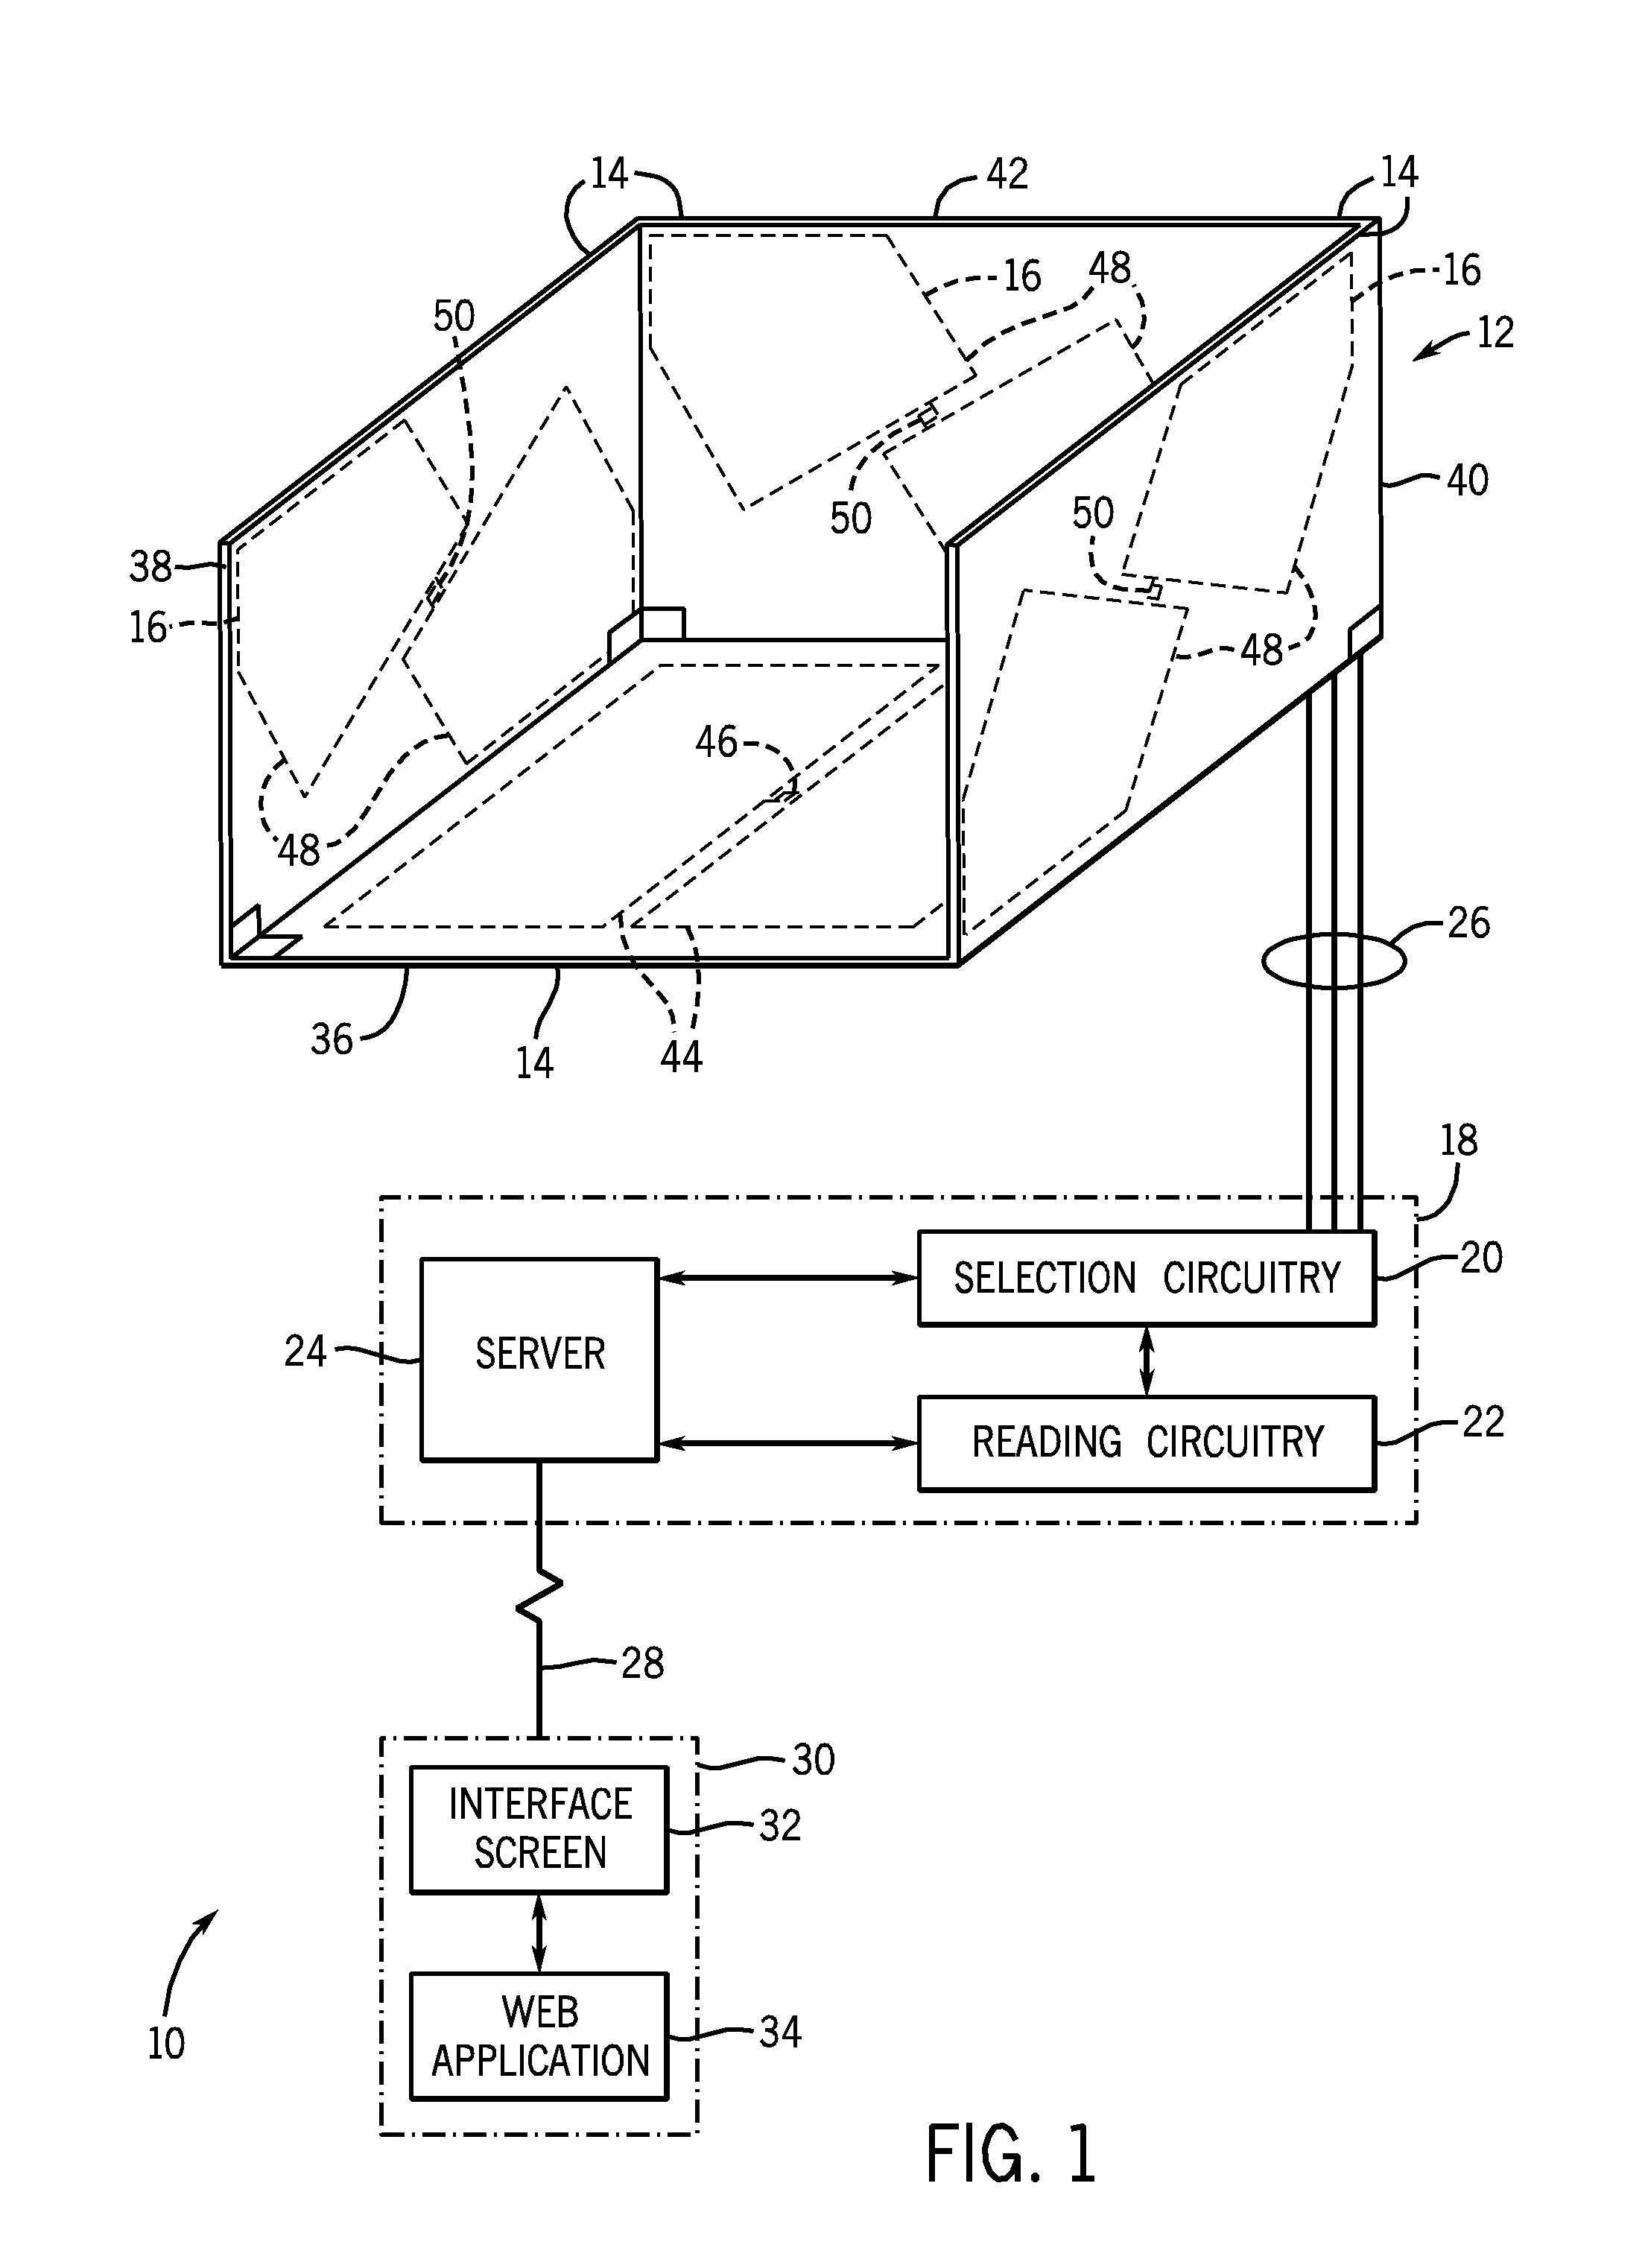 Antenna switching system and method